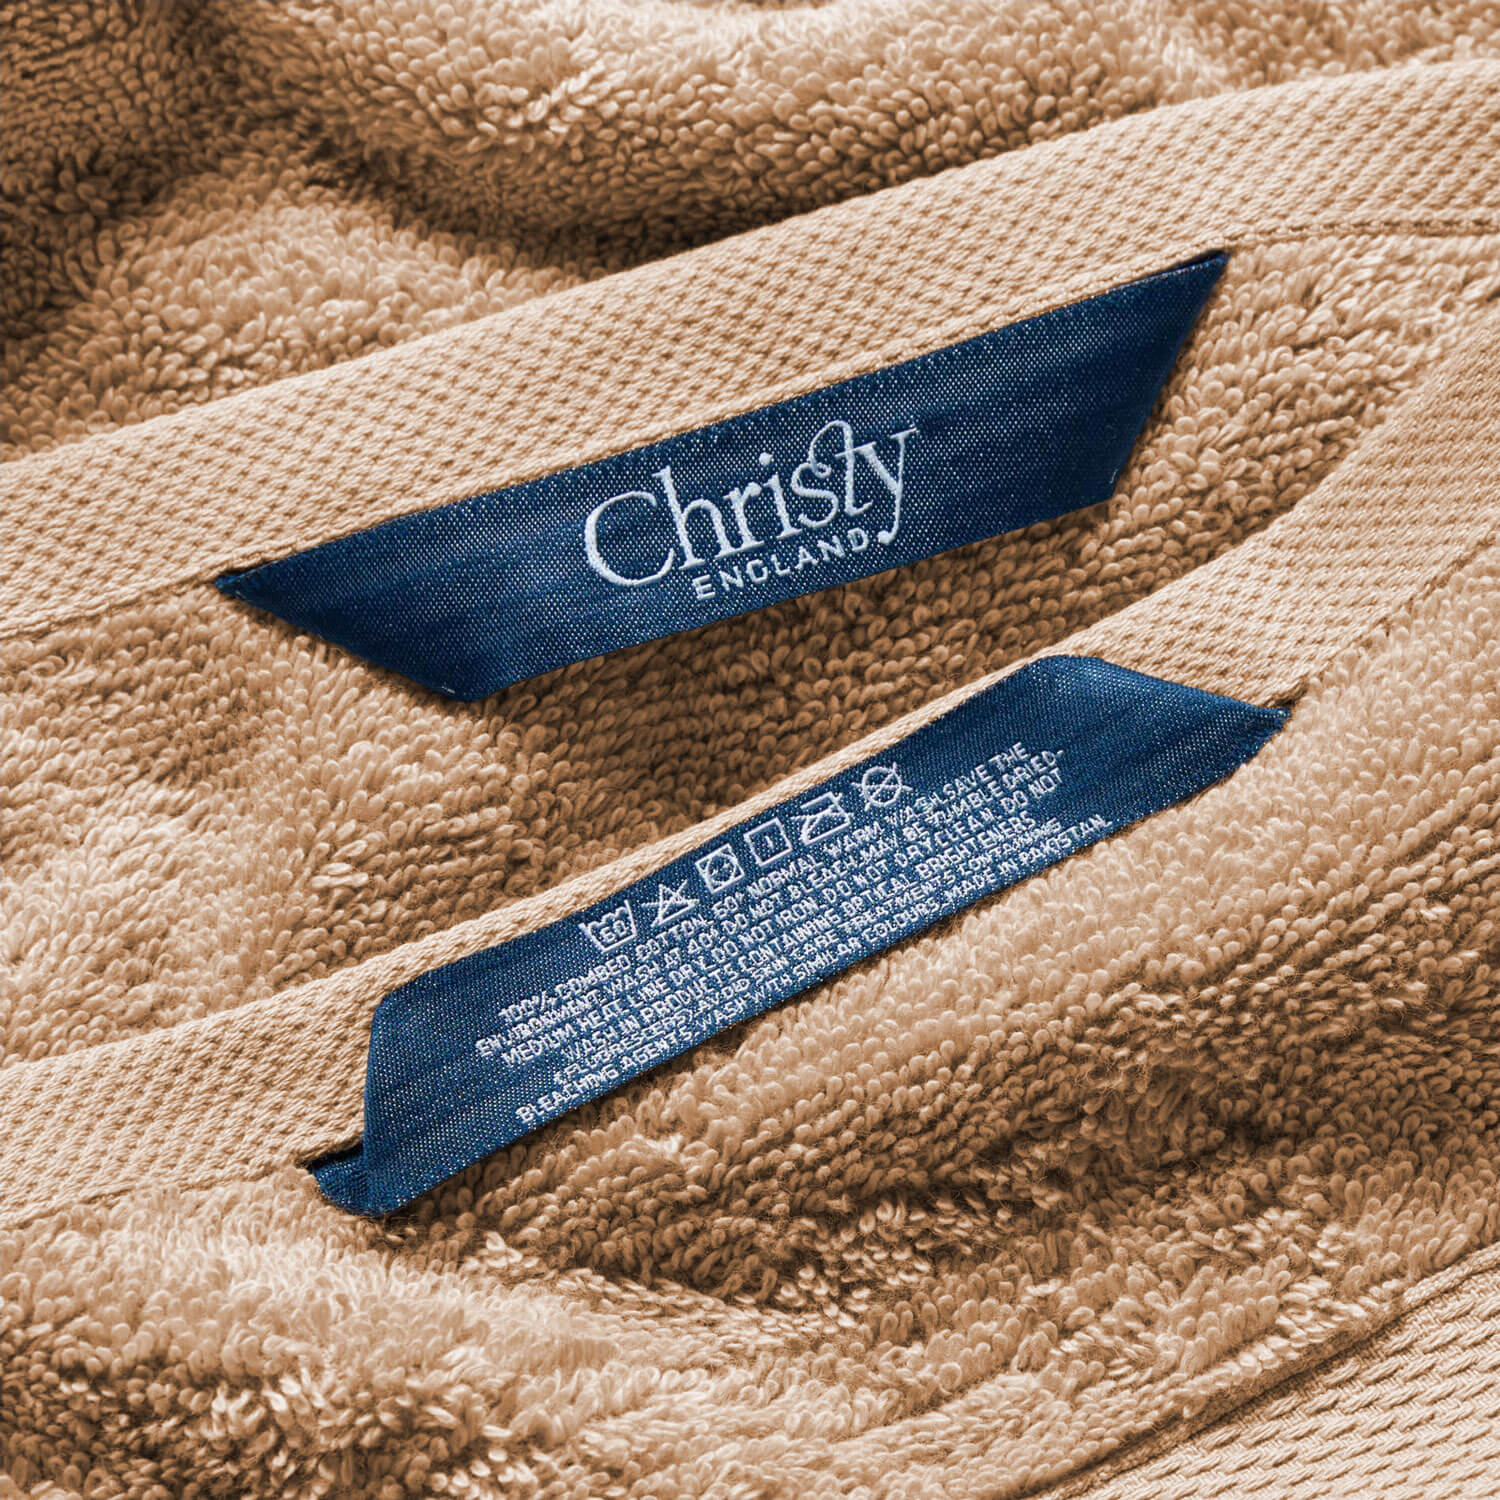 Christy Refresh Towels - Chai Latte 4 Shaws Department Stores